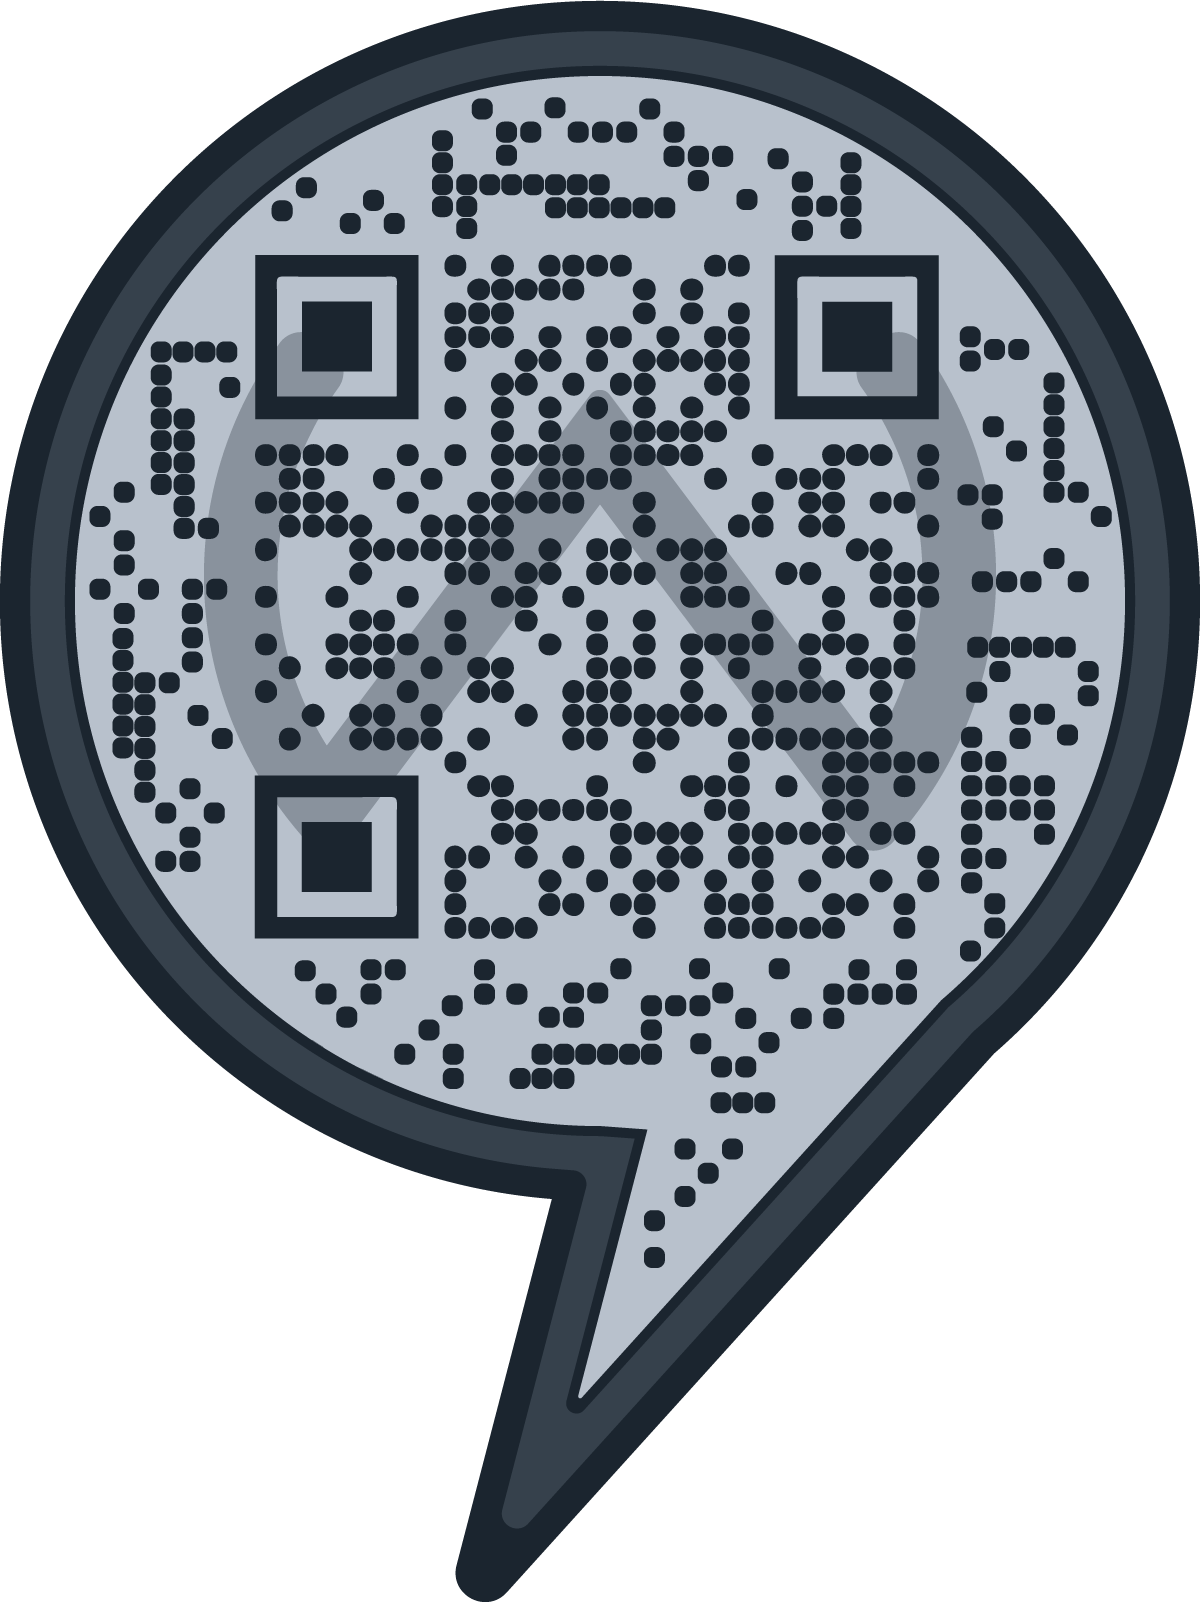 Scan to connect with Whisp